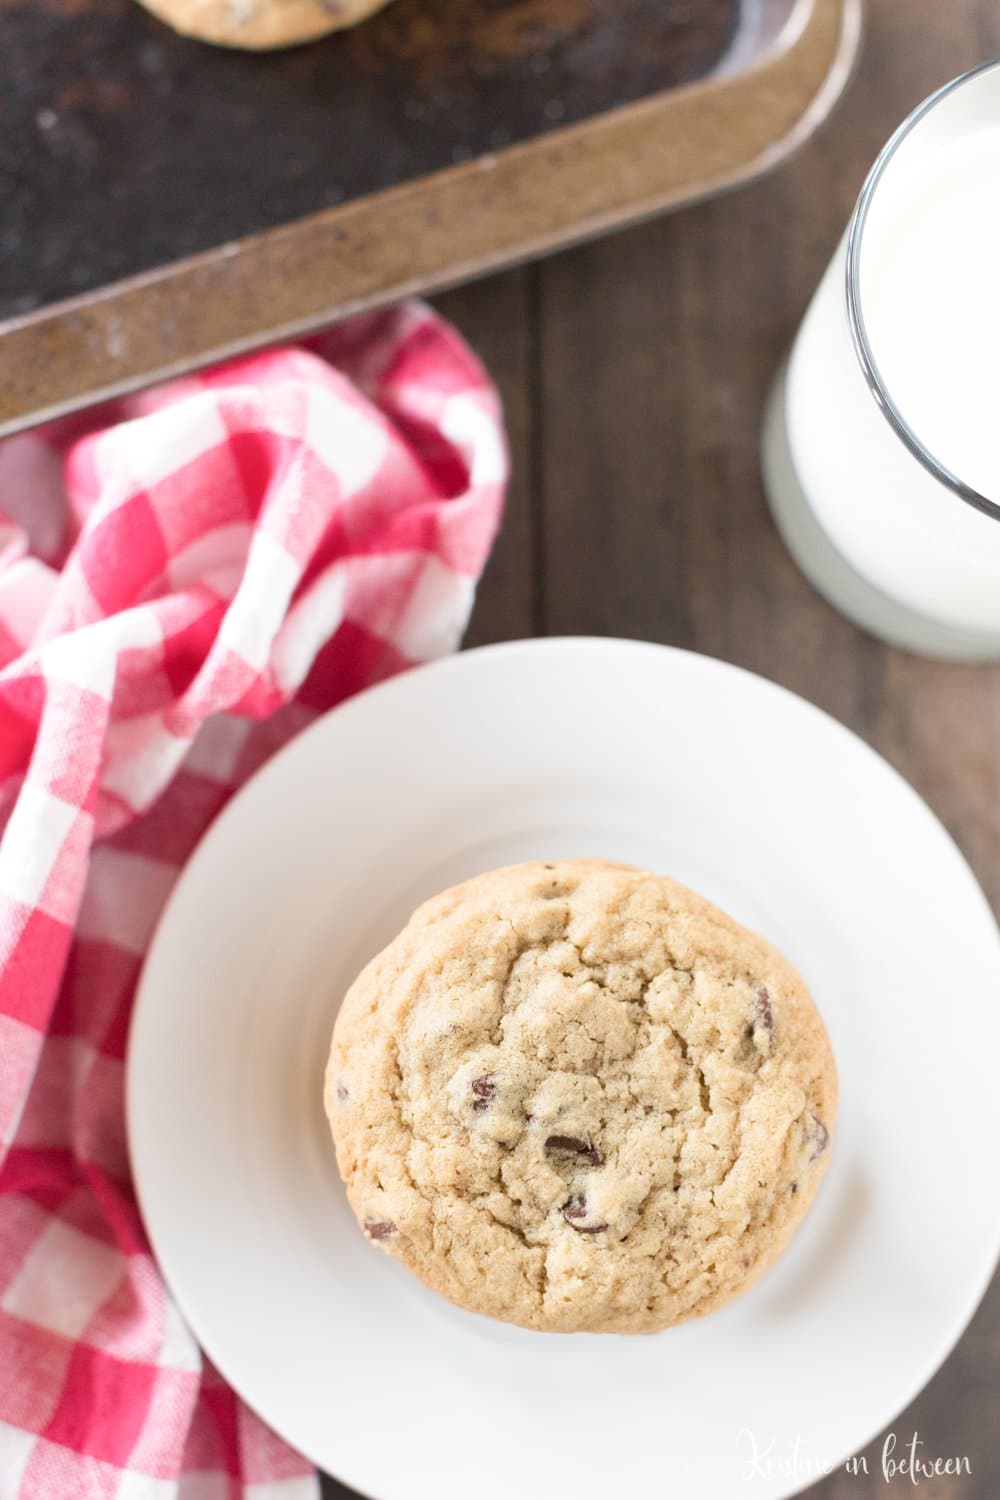 Giant chocolate chip cookies that are soft and chewy and loaded with chocolate chips!